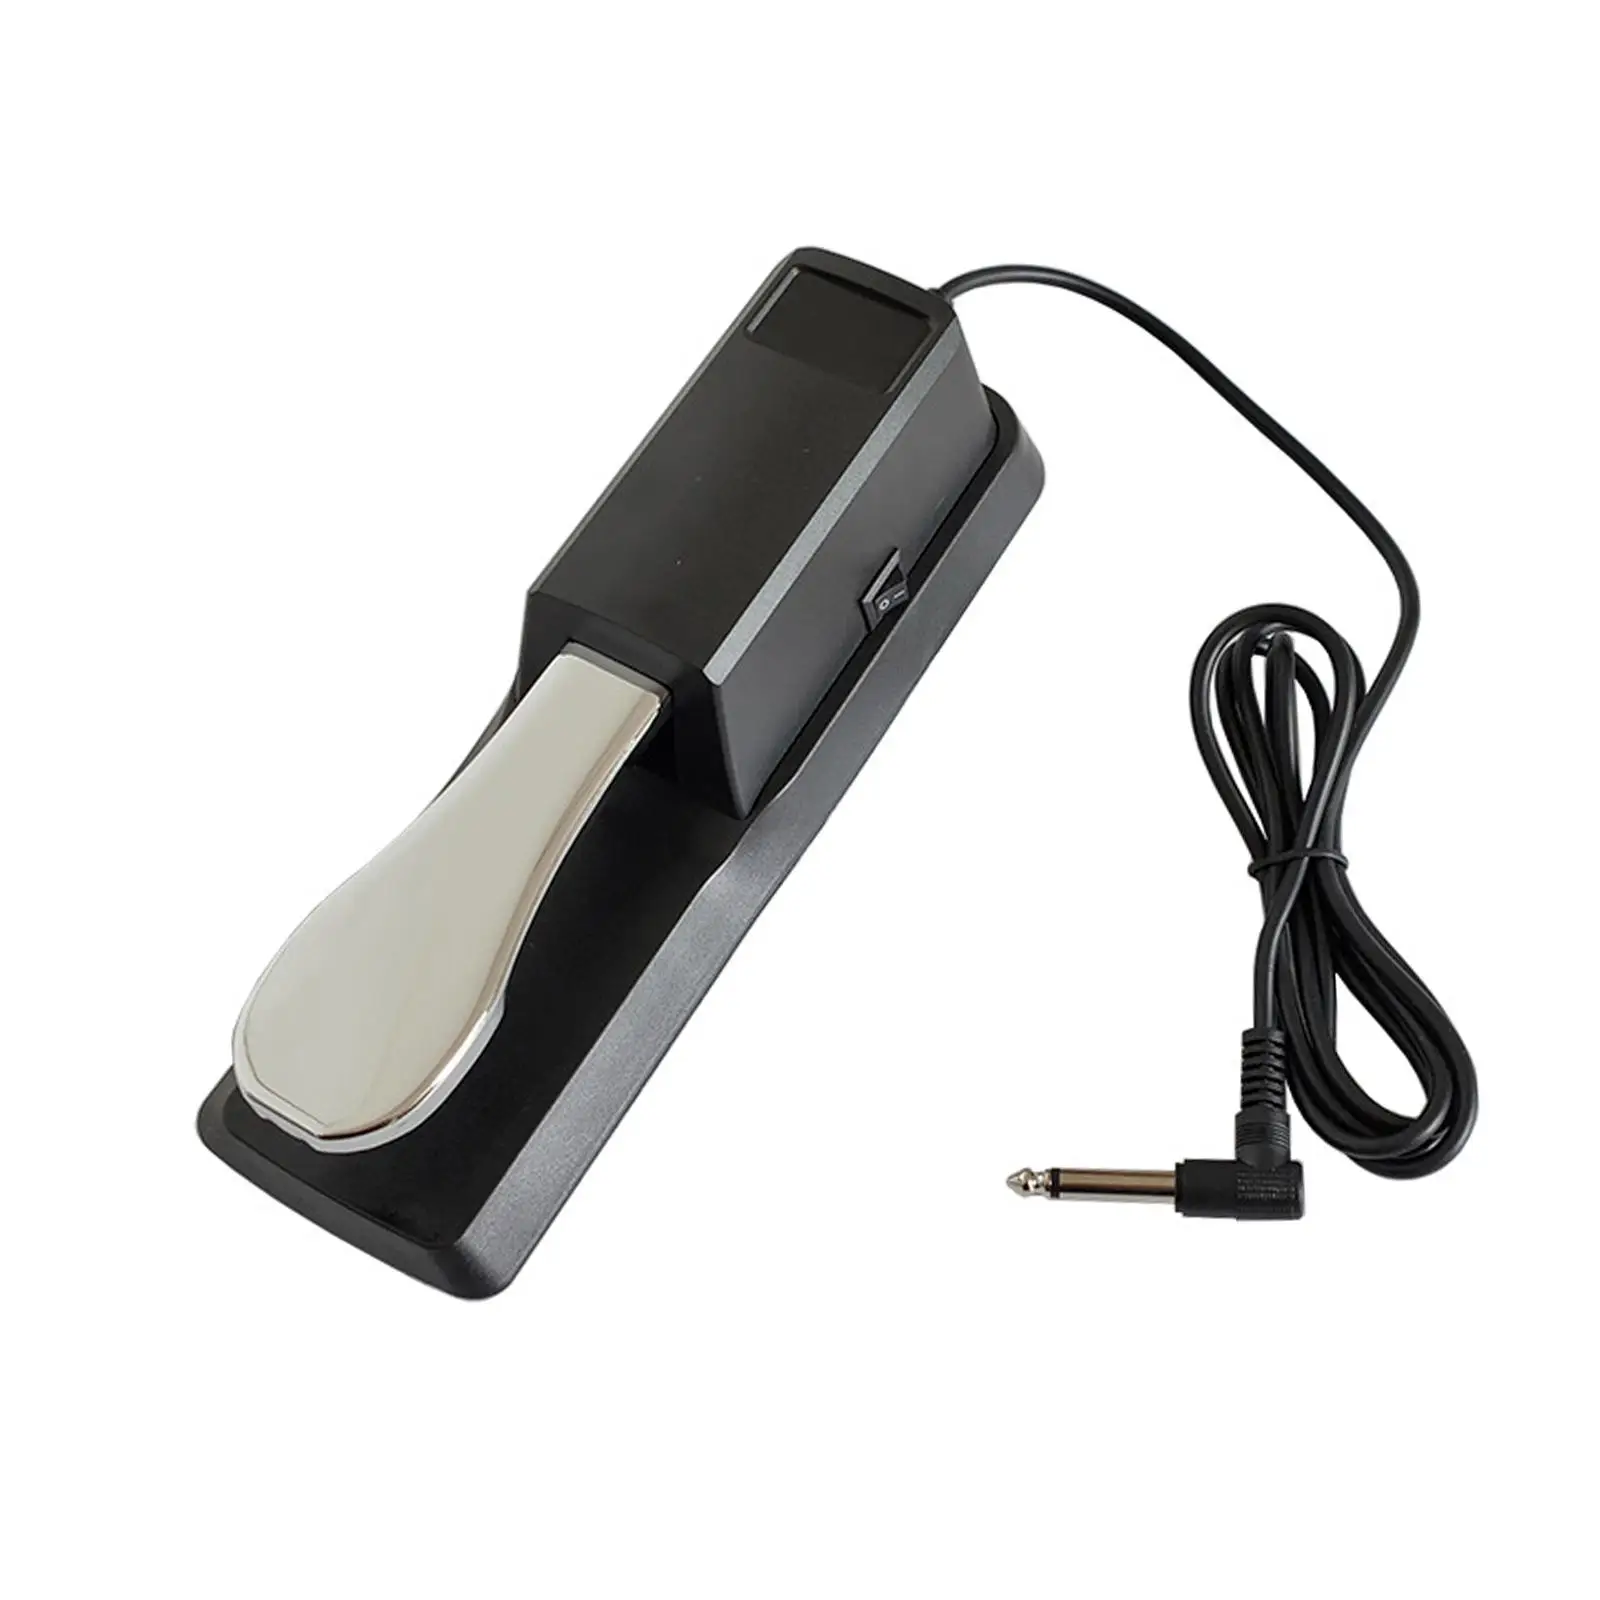 Keyboard Piano Pedal Polarity Switch Anti Slip Sustain Pedal for Training Repairing Performance Music Instrument Parts Exercise